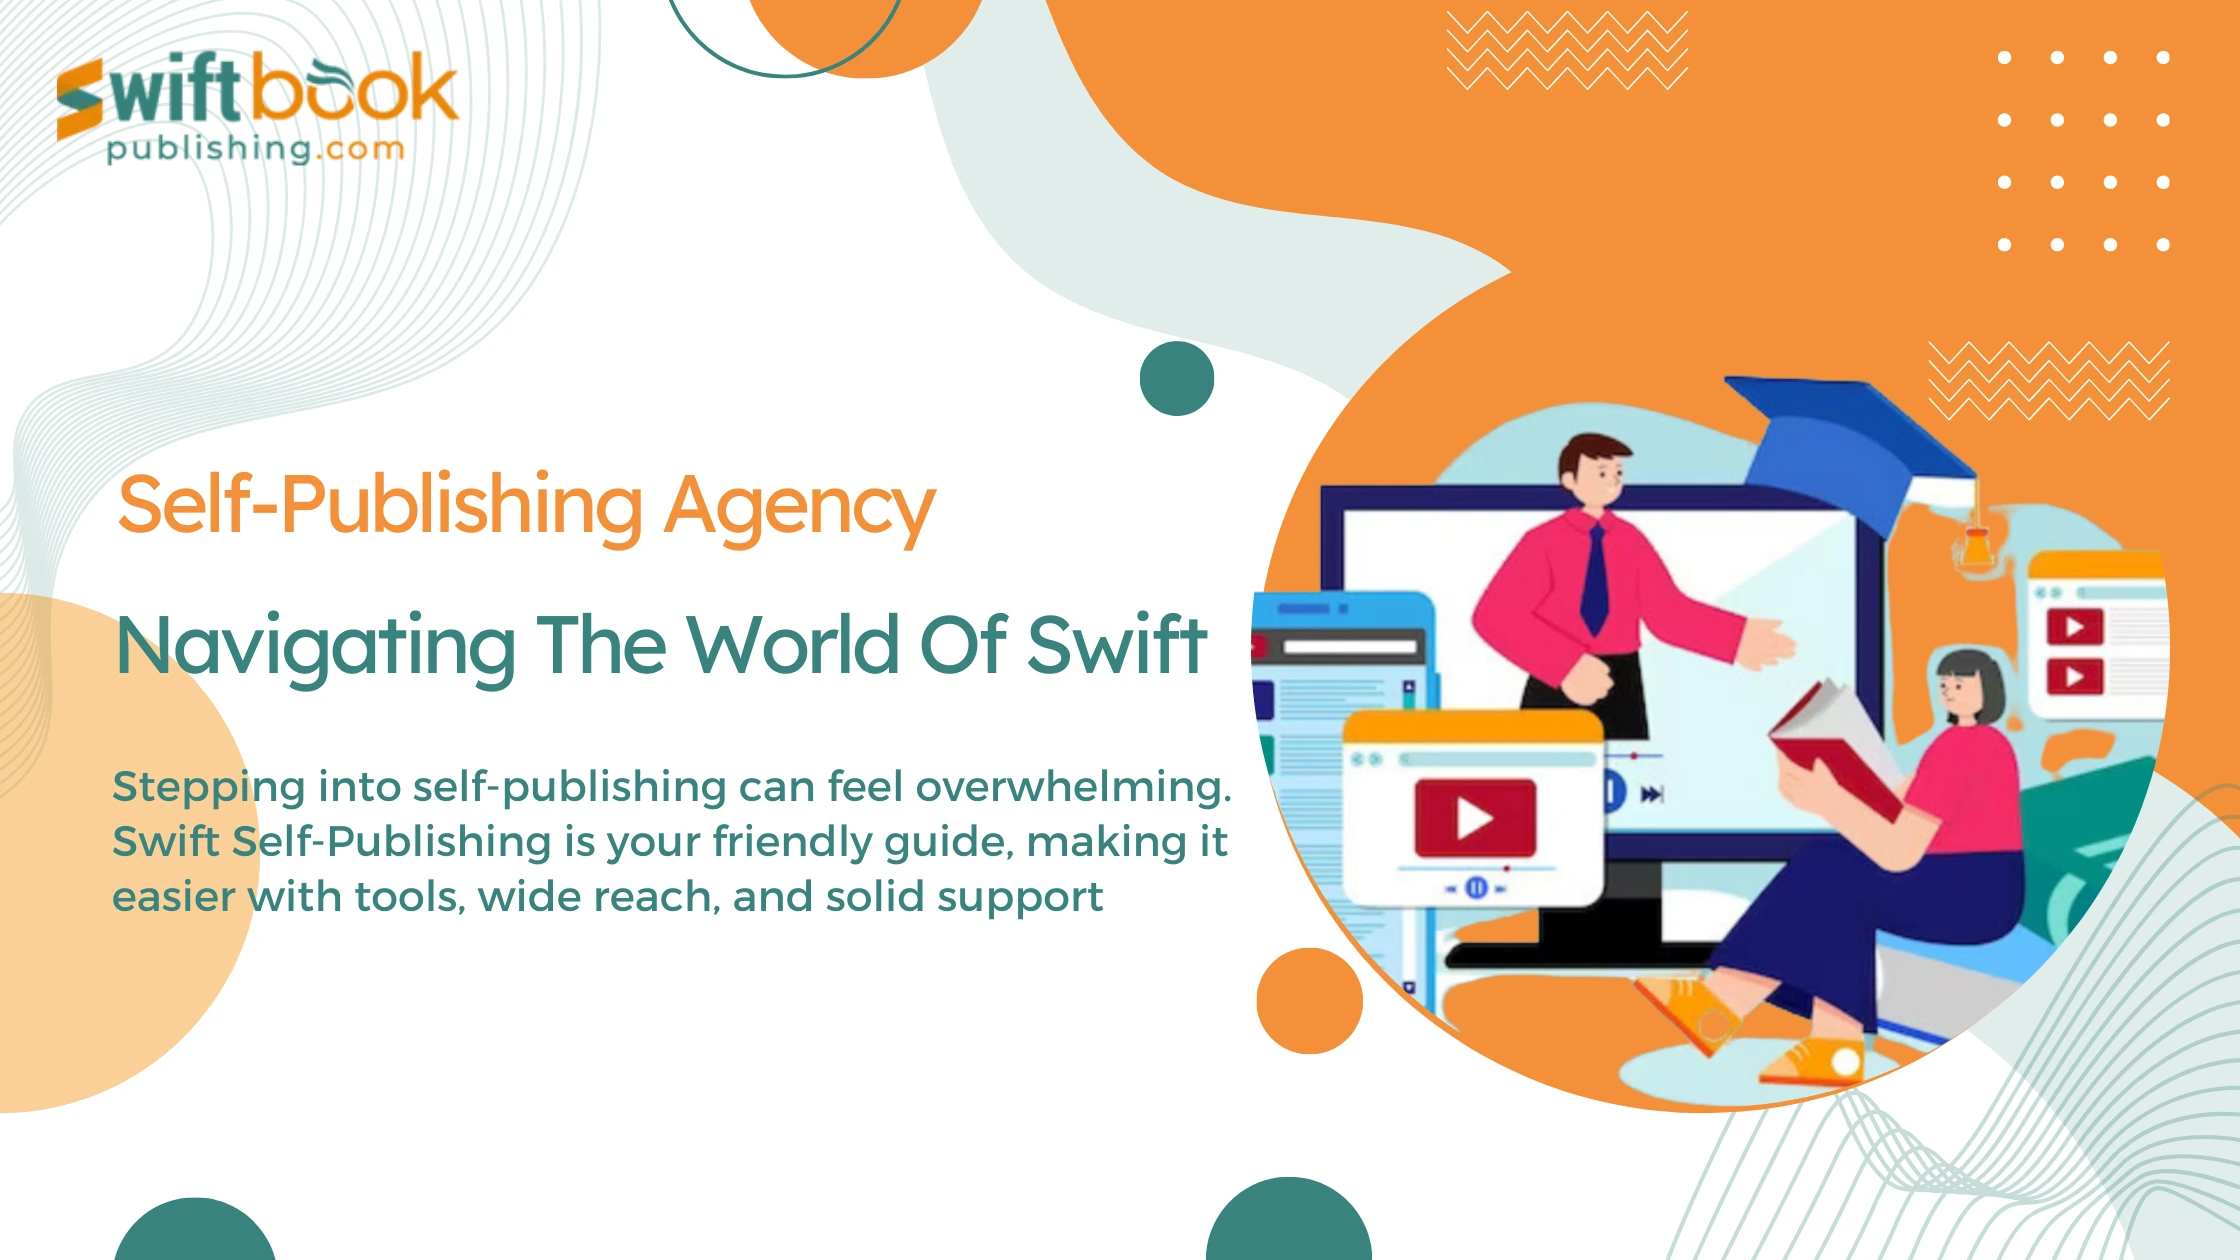 comprehensive guide to our book publishing platform - Swiftbook publishing blog